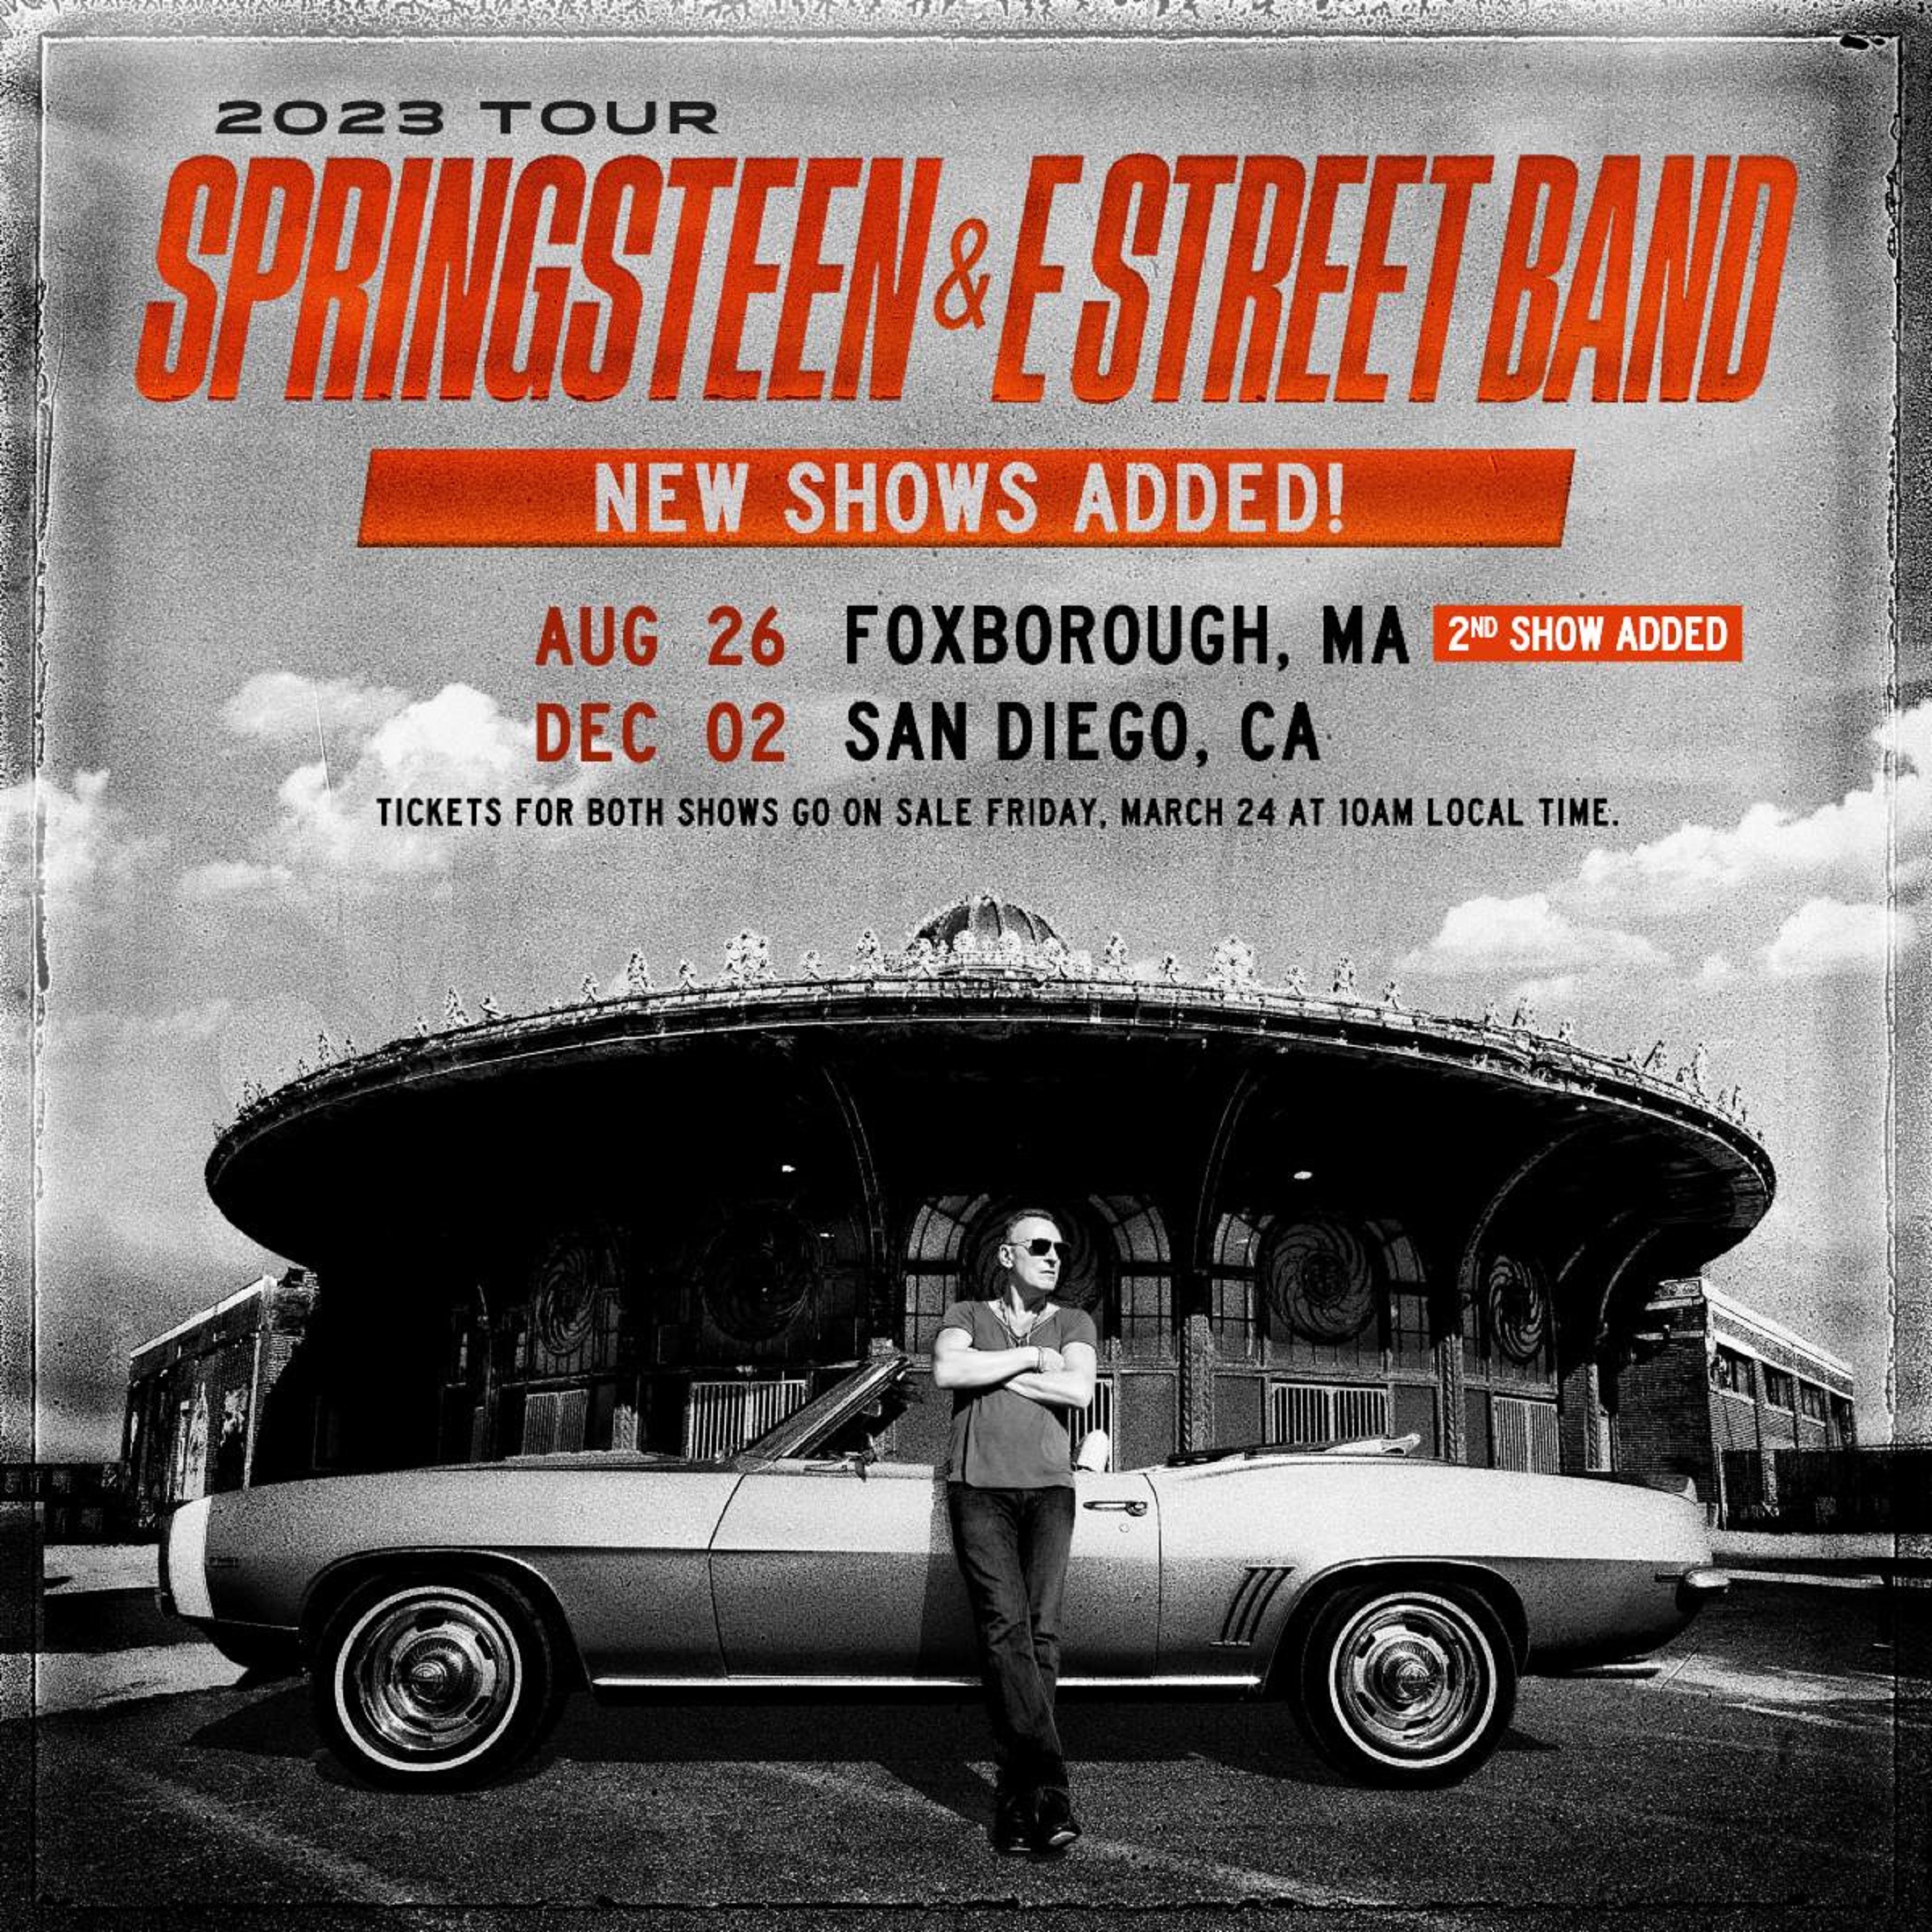 Bruce Springsteen and The E Street Band Add San Diego Show And Second Night In Foxborough